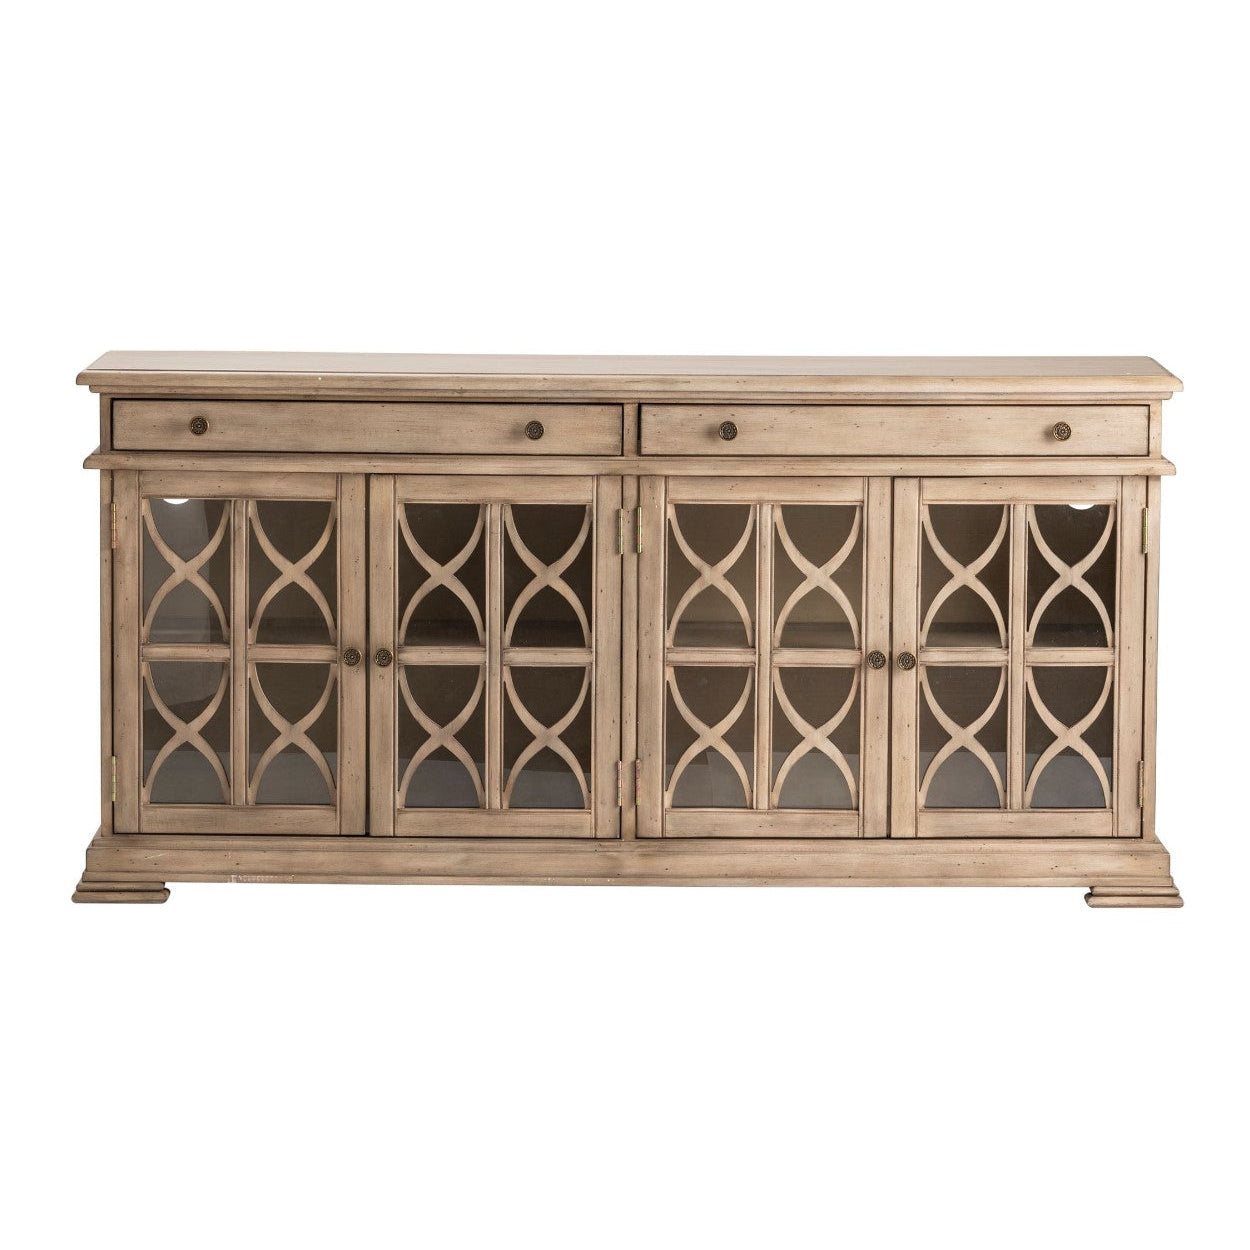 Crestview Collection Hawthorne Estate 76" x 17" x 37" 2-Drawer 4-Door Traditional Wood Fretwork Sideboard In Brushed Wheat Finish